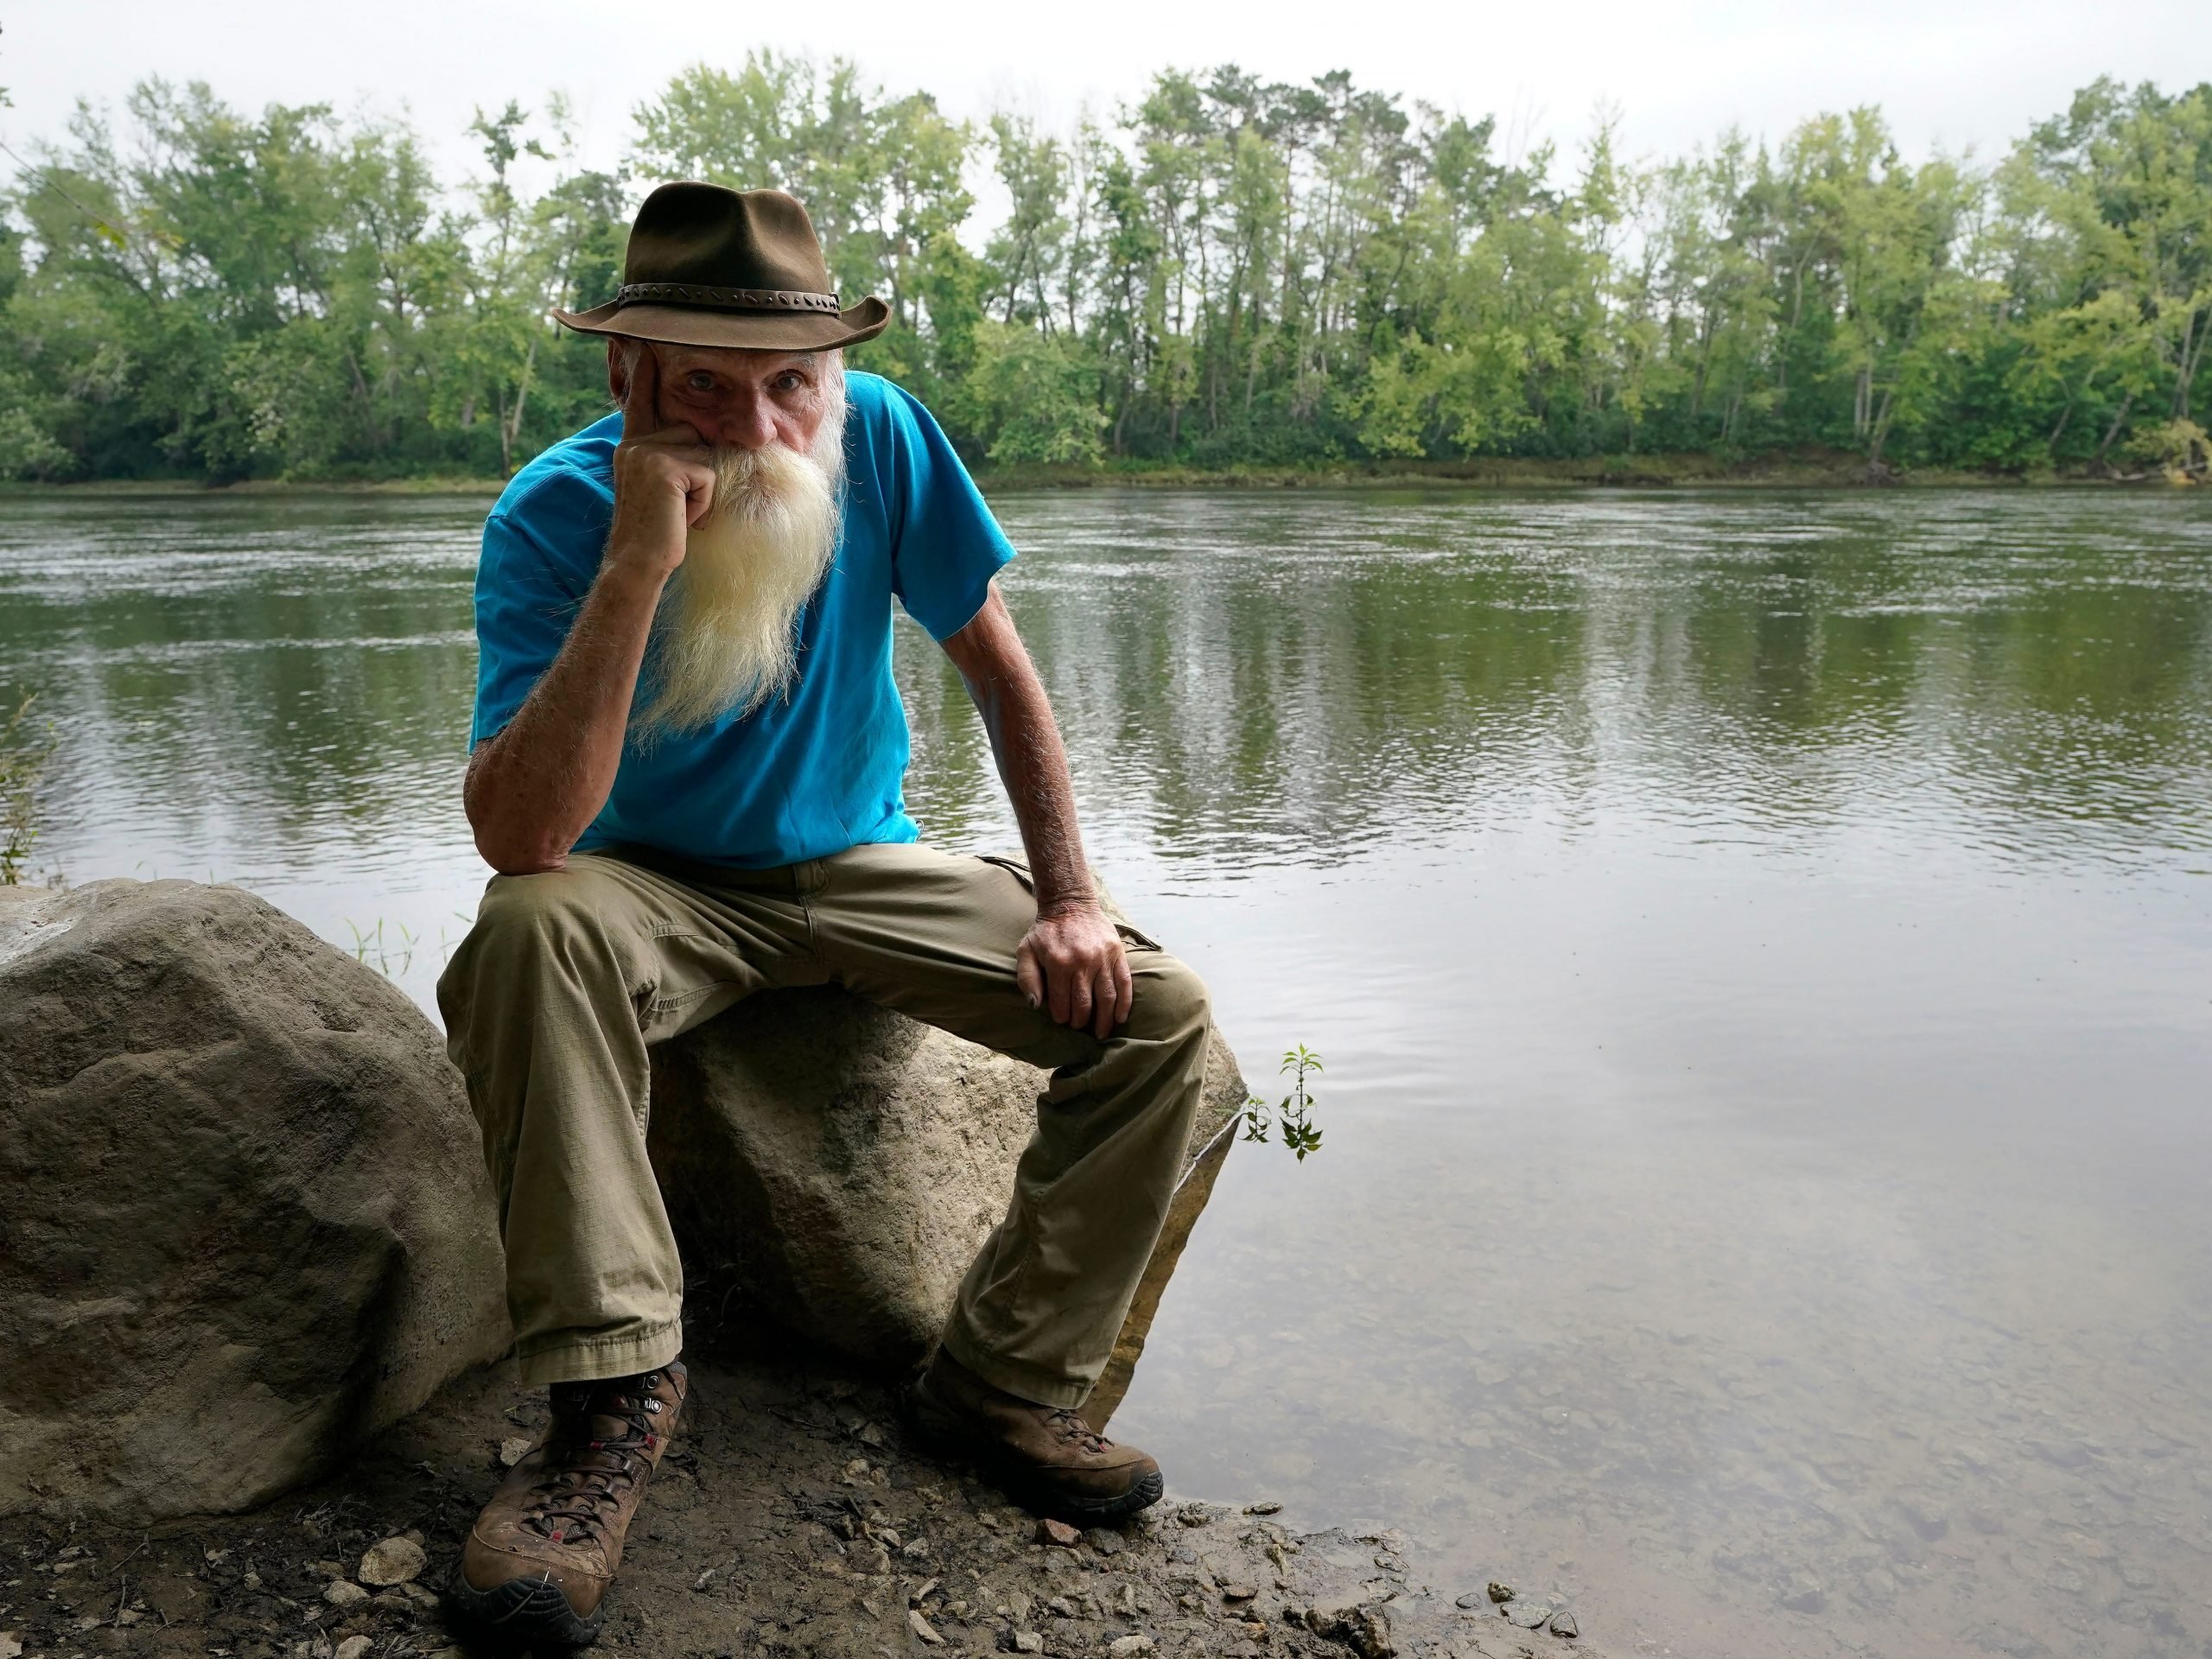 David Lidstone sits for a photograph near the Merrimack River, Tuesday, Aug. 10, 2021, in Boscawen, N.H.